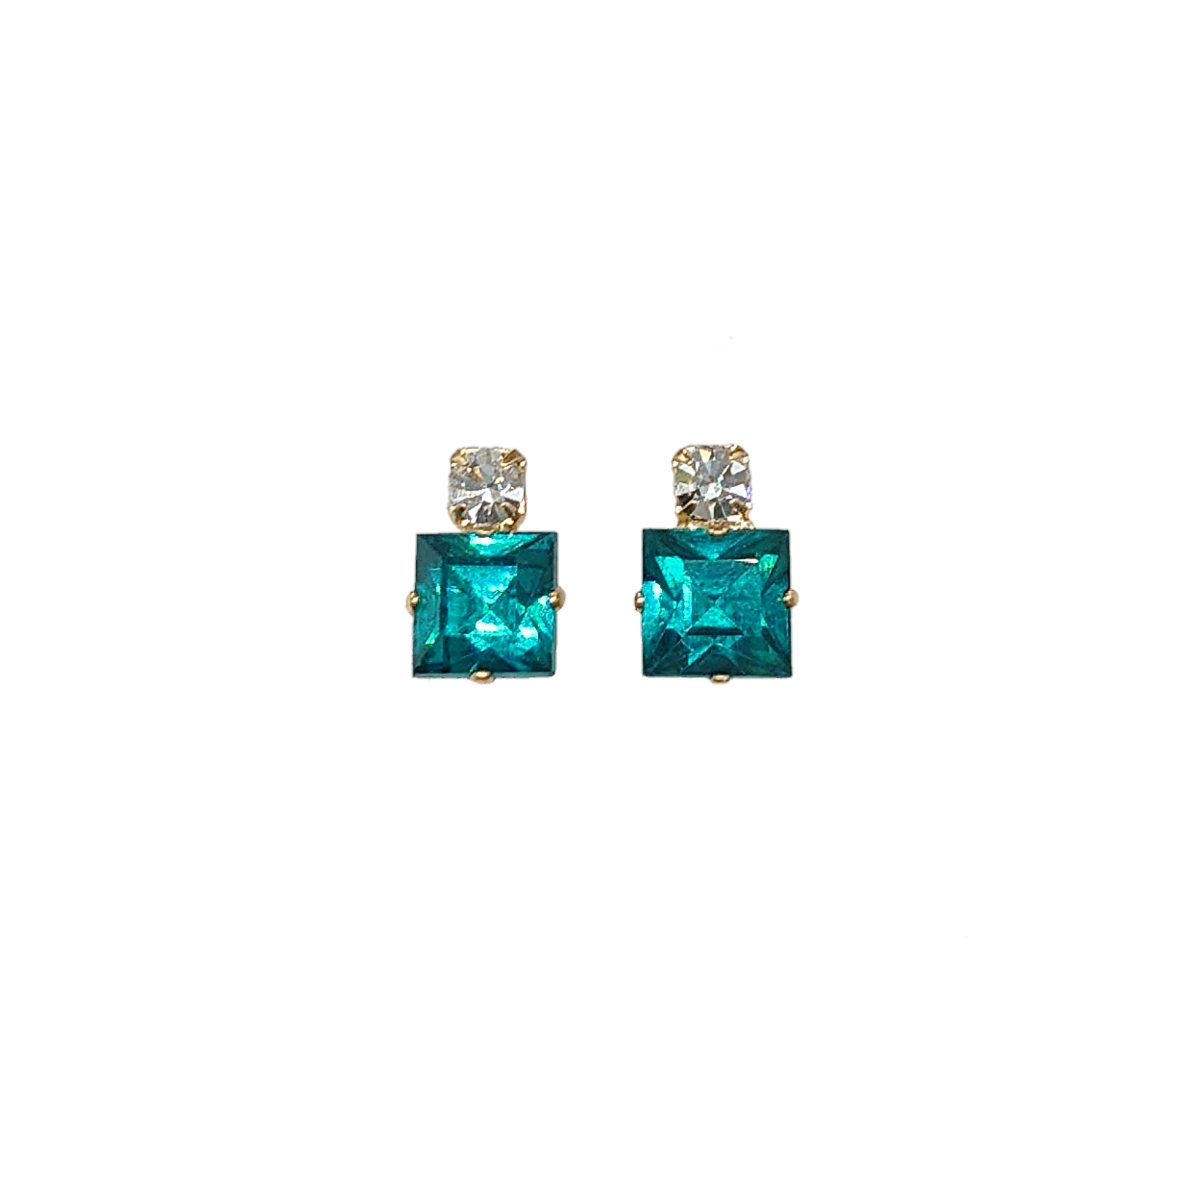 Small Square Earrings - Swarovski Crystals - Gold Fittings